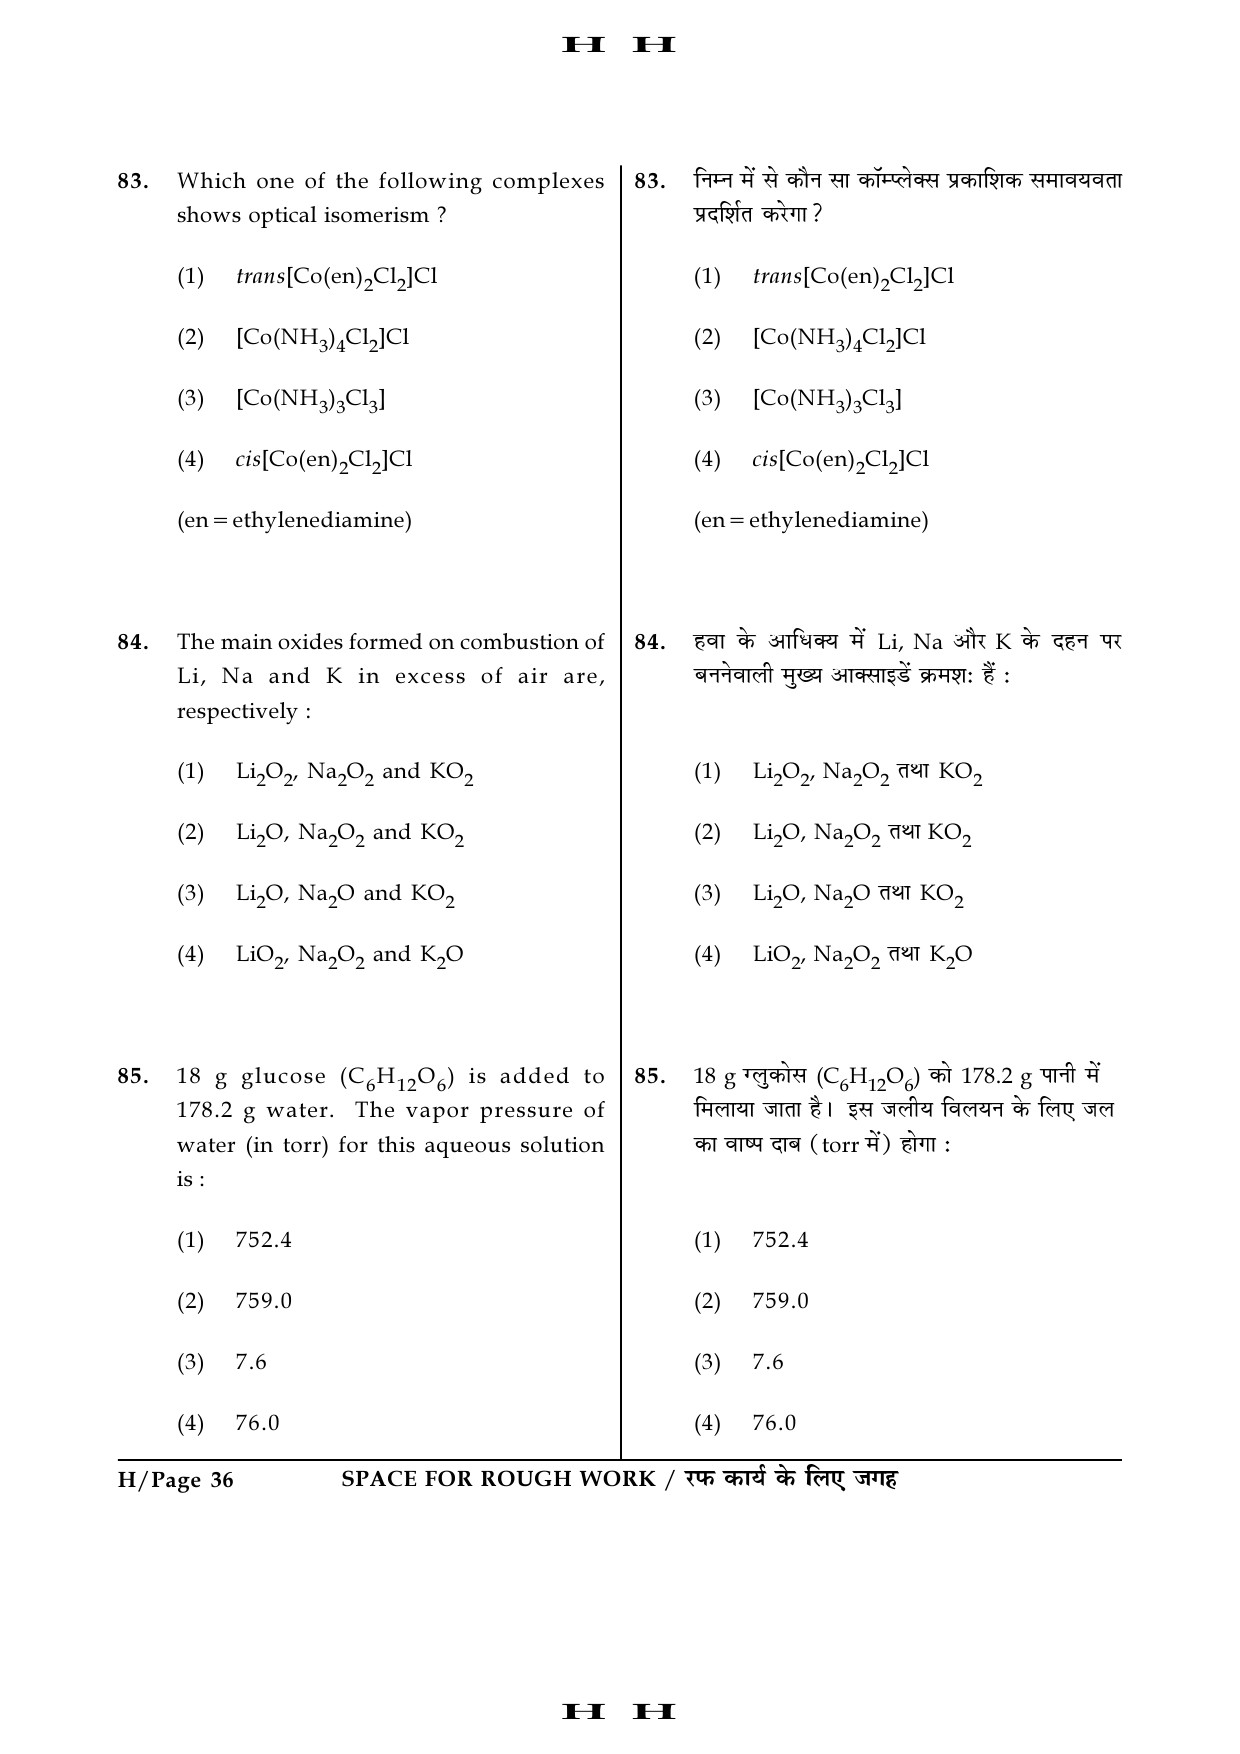 JEE Main Exam Question Paper 2016 Booklet H 36